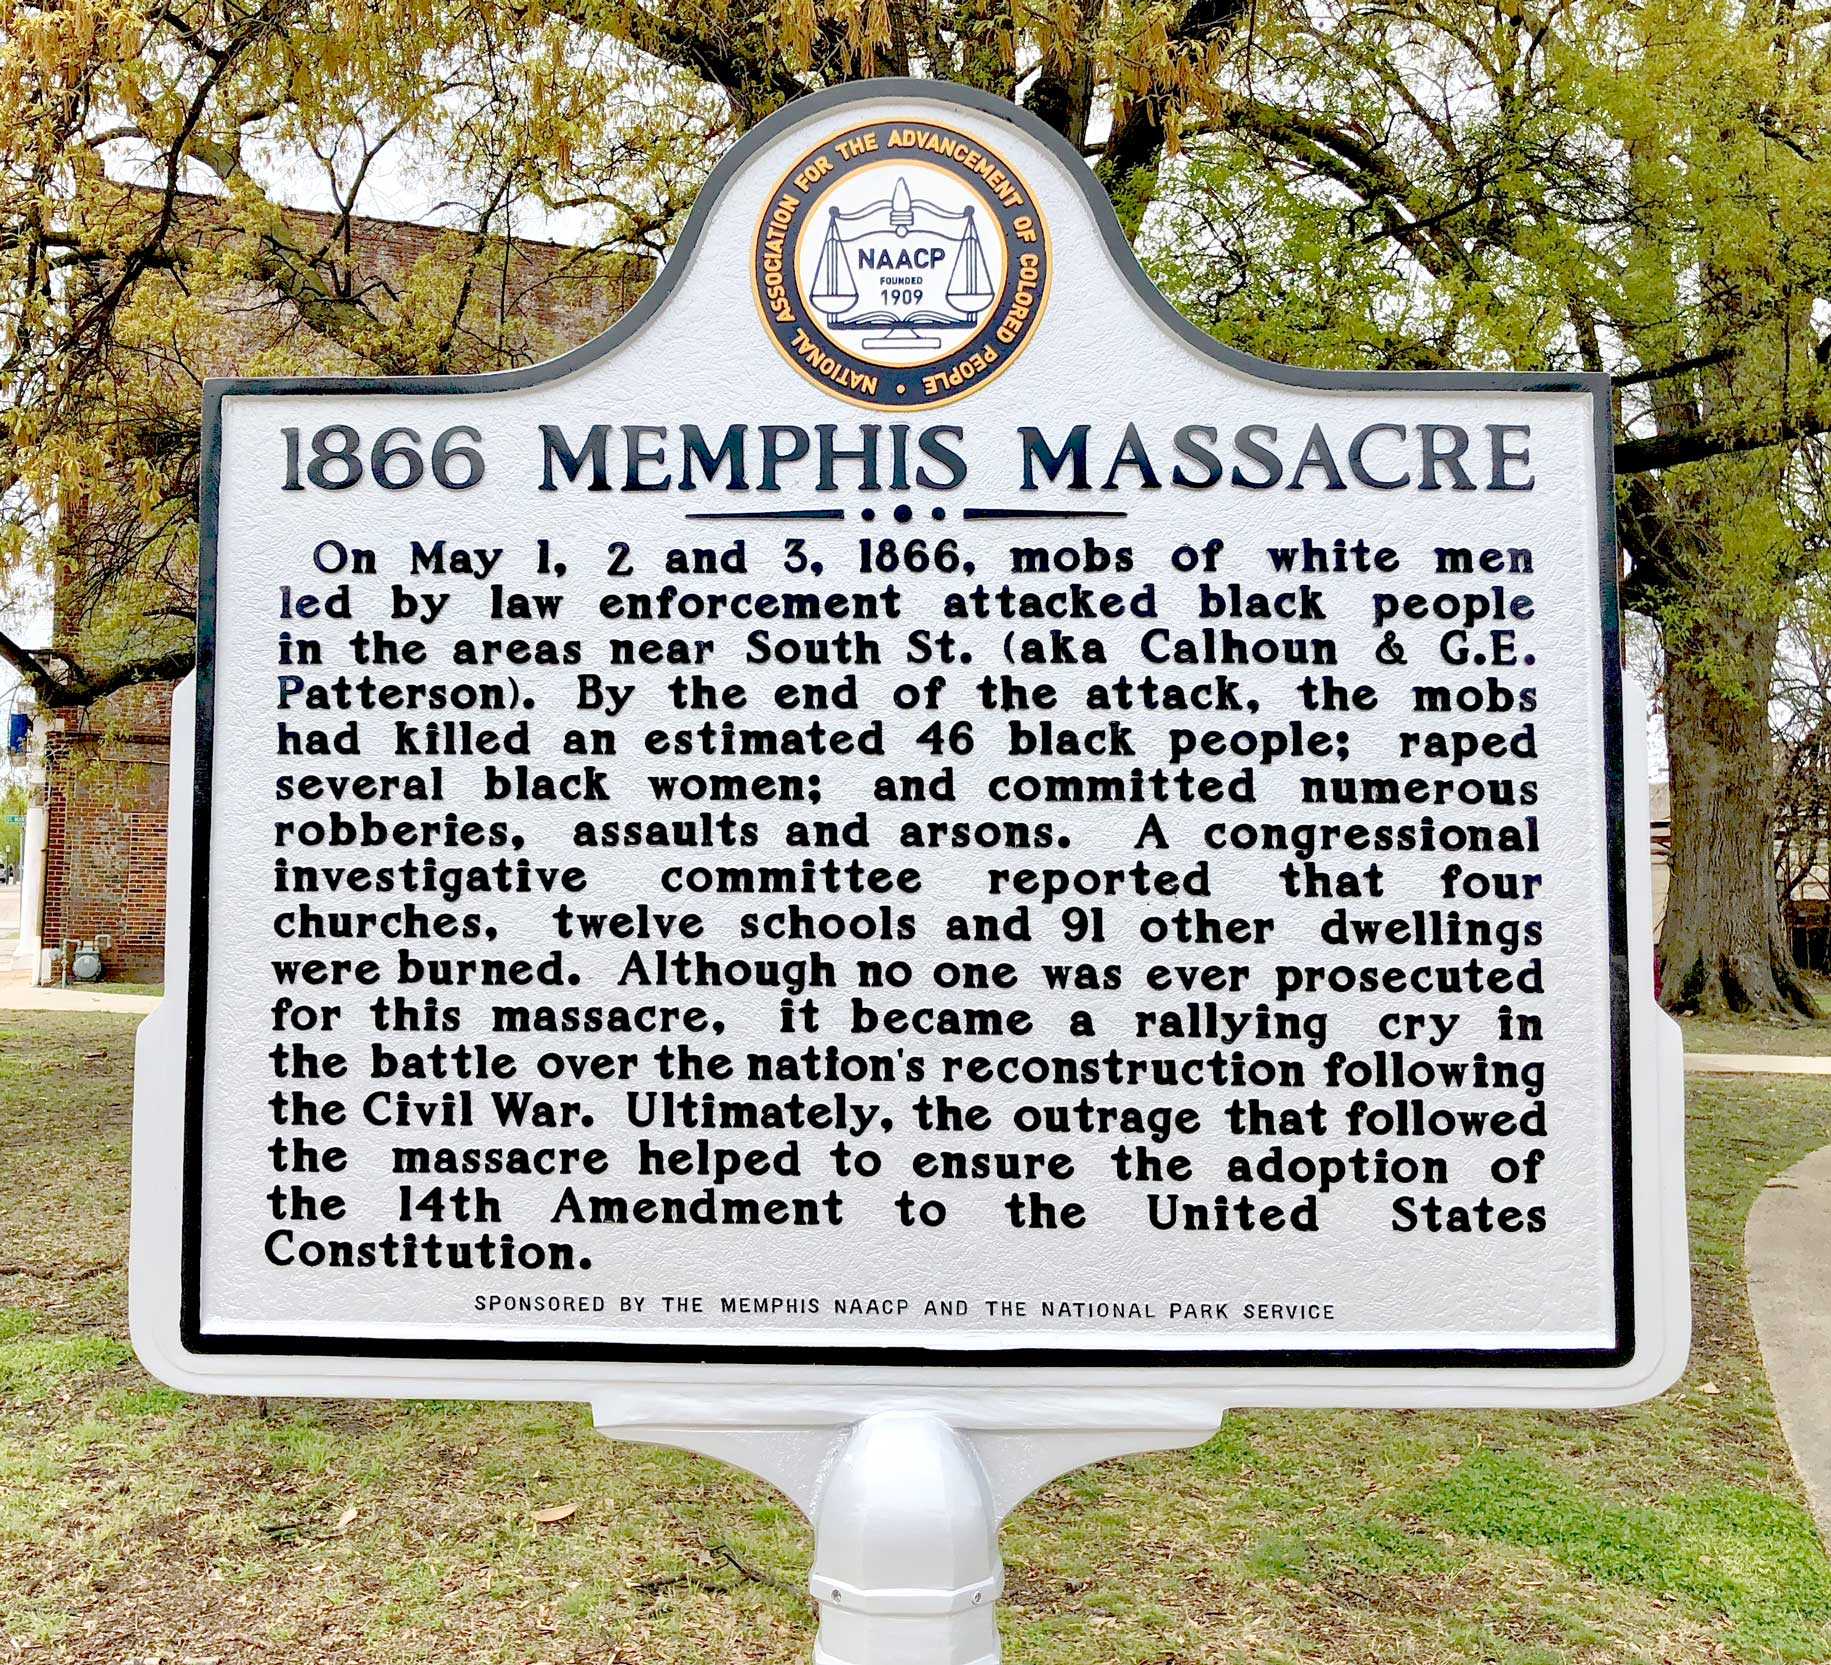 A picture of the historical street sign plaque marking the spot of the 1866 Memphis Massacre.